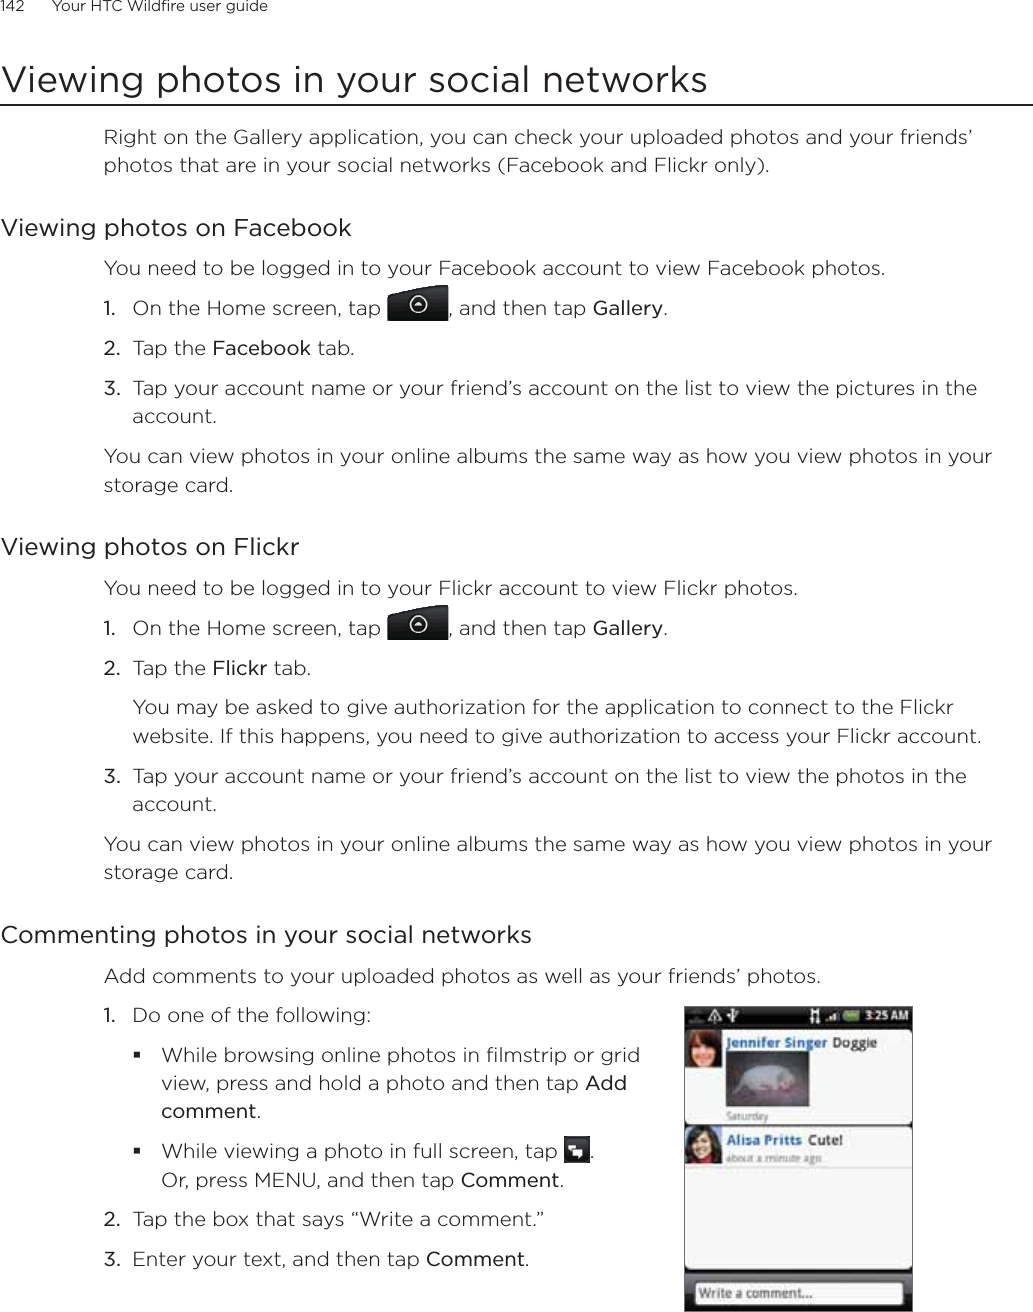 142      Your HTC Wildfire user guide      Viewing photos in your social networksRight on the Gallery application, you can check your uploaded photos and your friends’ photos that are in your social networks (Facebook and Flickr only).Viewing photos on FacebookYou need to be logged in to your Facebook account to view Facebook photos.On the Home screen, tap  , and then tap Gallery.Tap the Facebook tab.Tap your account name or your friend’s account on the list to view the pictures in the account.You can view photos in your online albums the same way as how you view photos in your storage card.Viewing photos on FlickrYou need to be logged in to your Flickr account to view Flickr photos.1.  On the Home screen, tap  , and then tap Gallery.2.  Tap the Flickr tab.You may be asked to give authorization for the application to connect to the Flickr website. If this happens, you need to give authorization to access your Flickr account.3.  Tap your account name or your friend’s account on the list to view the photos in the account.You can view photos in your online albums the same way as how you view photos in your storage card.Commenting photos in your social networksAdd comments to your uploaded photos as well as your friends’ photos. 1.  Do one of the following:While browsing online photos in filmstrip or grid view, press and hold a photo and then tap Add comment.While viewing a photo in full screen, tap  .  Or, press MENU, and then tap Comment.2.  Tap the box that says “Write a comment.”3.  Enter your text, and then tap Comment.1.2.3.